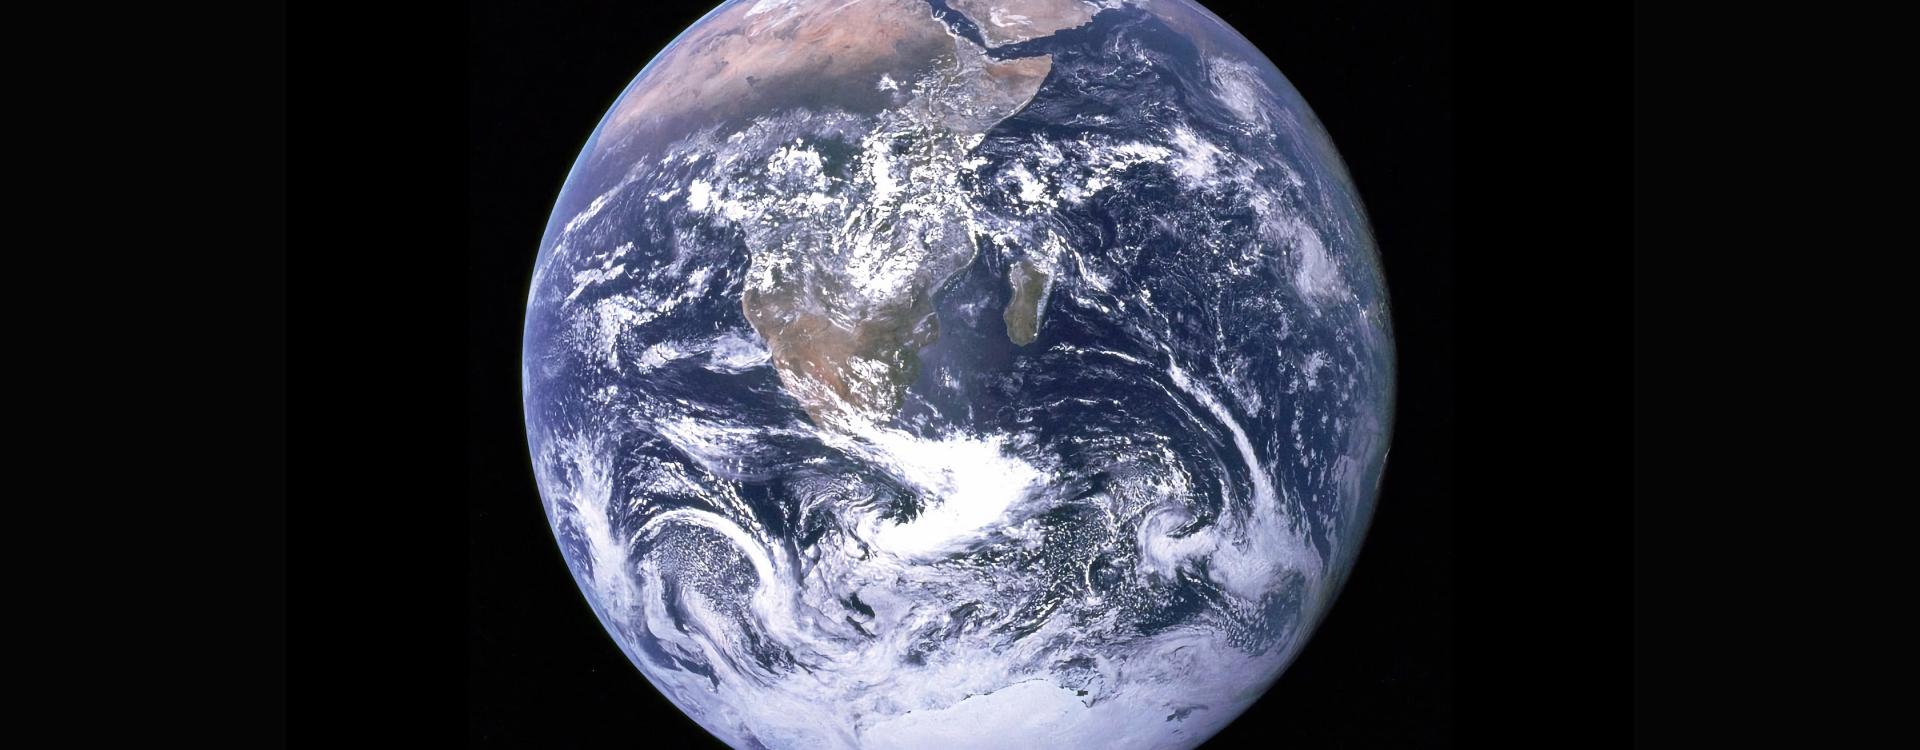 Earth from space, globe against black background